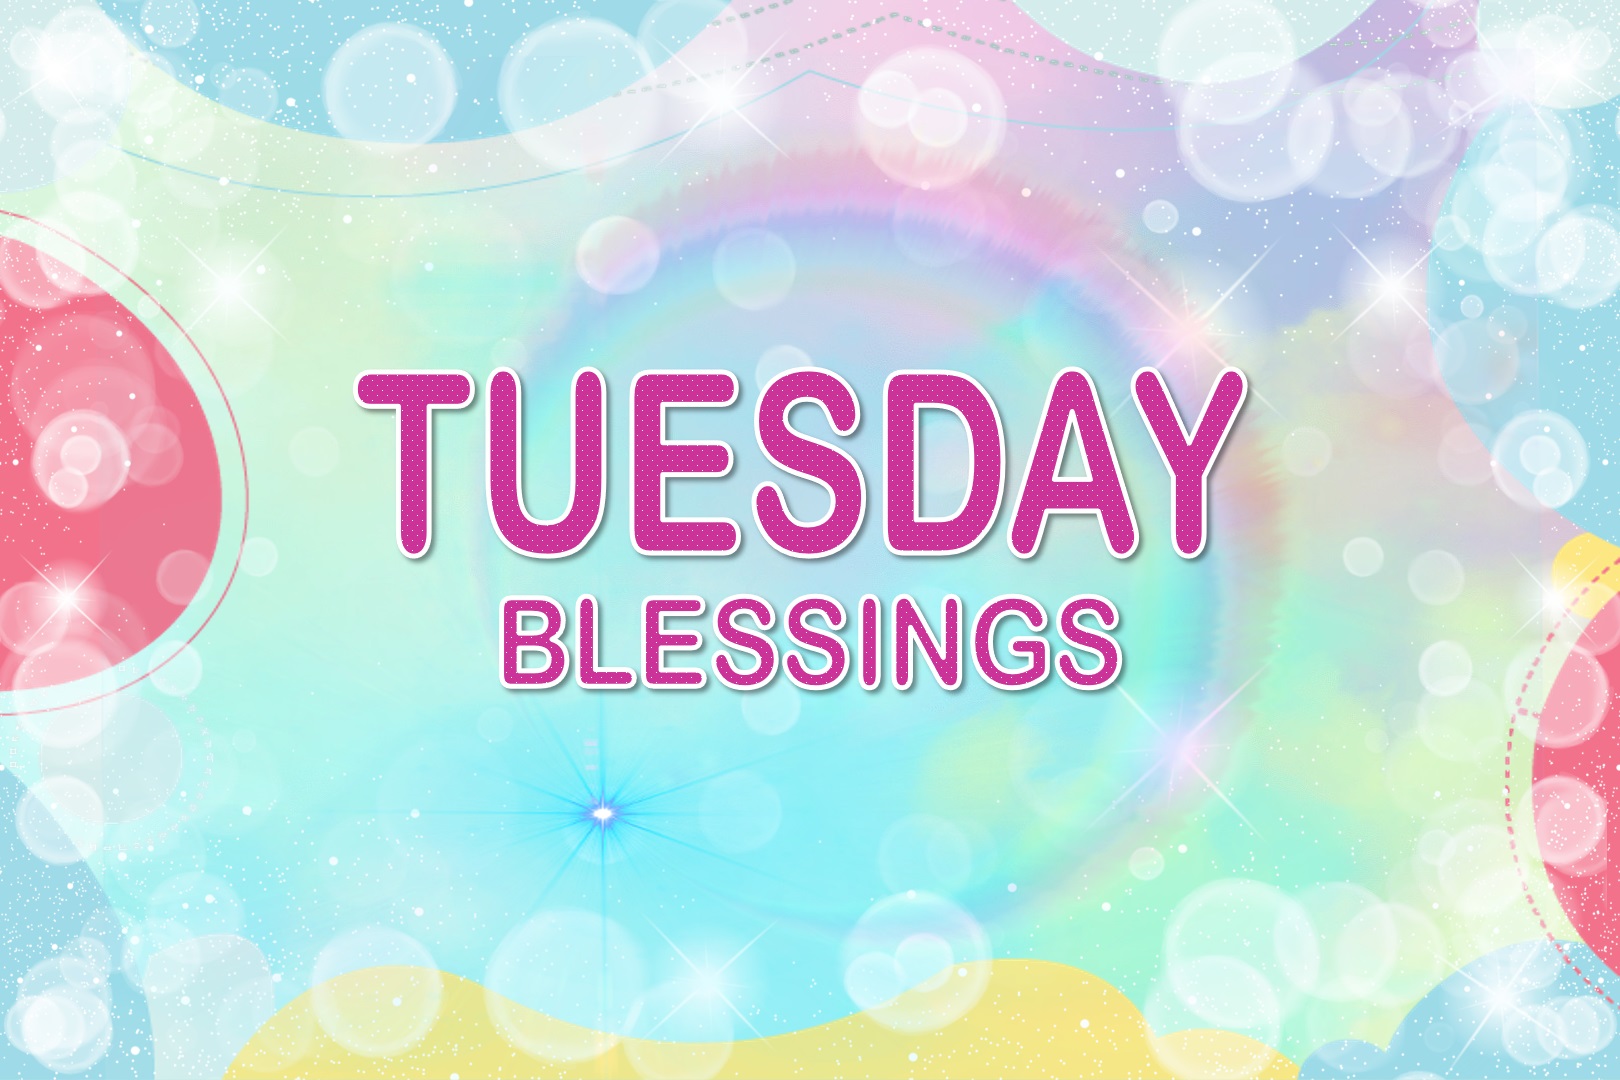 Best Tuesday Blessings Quotes And Messages | SuperbWishes